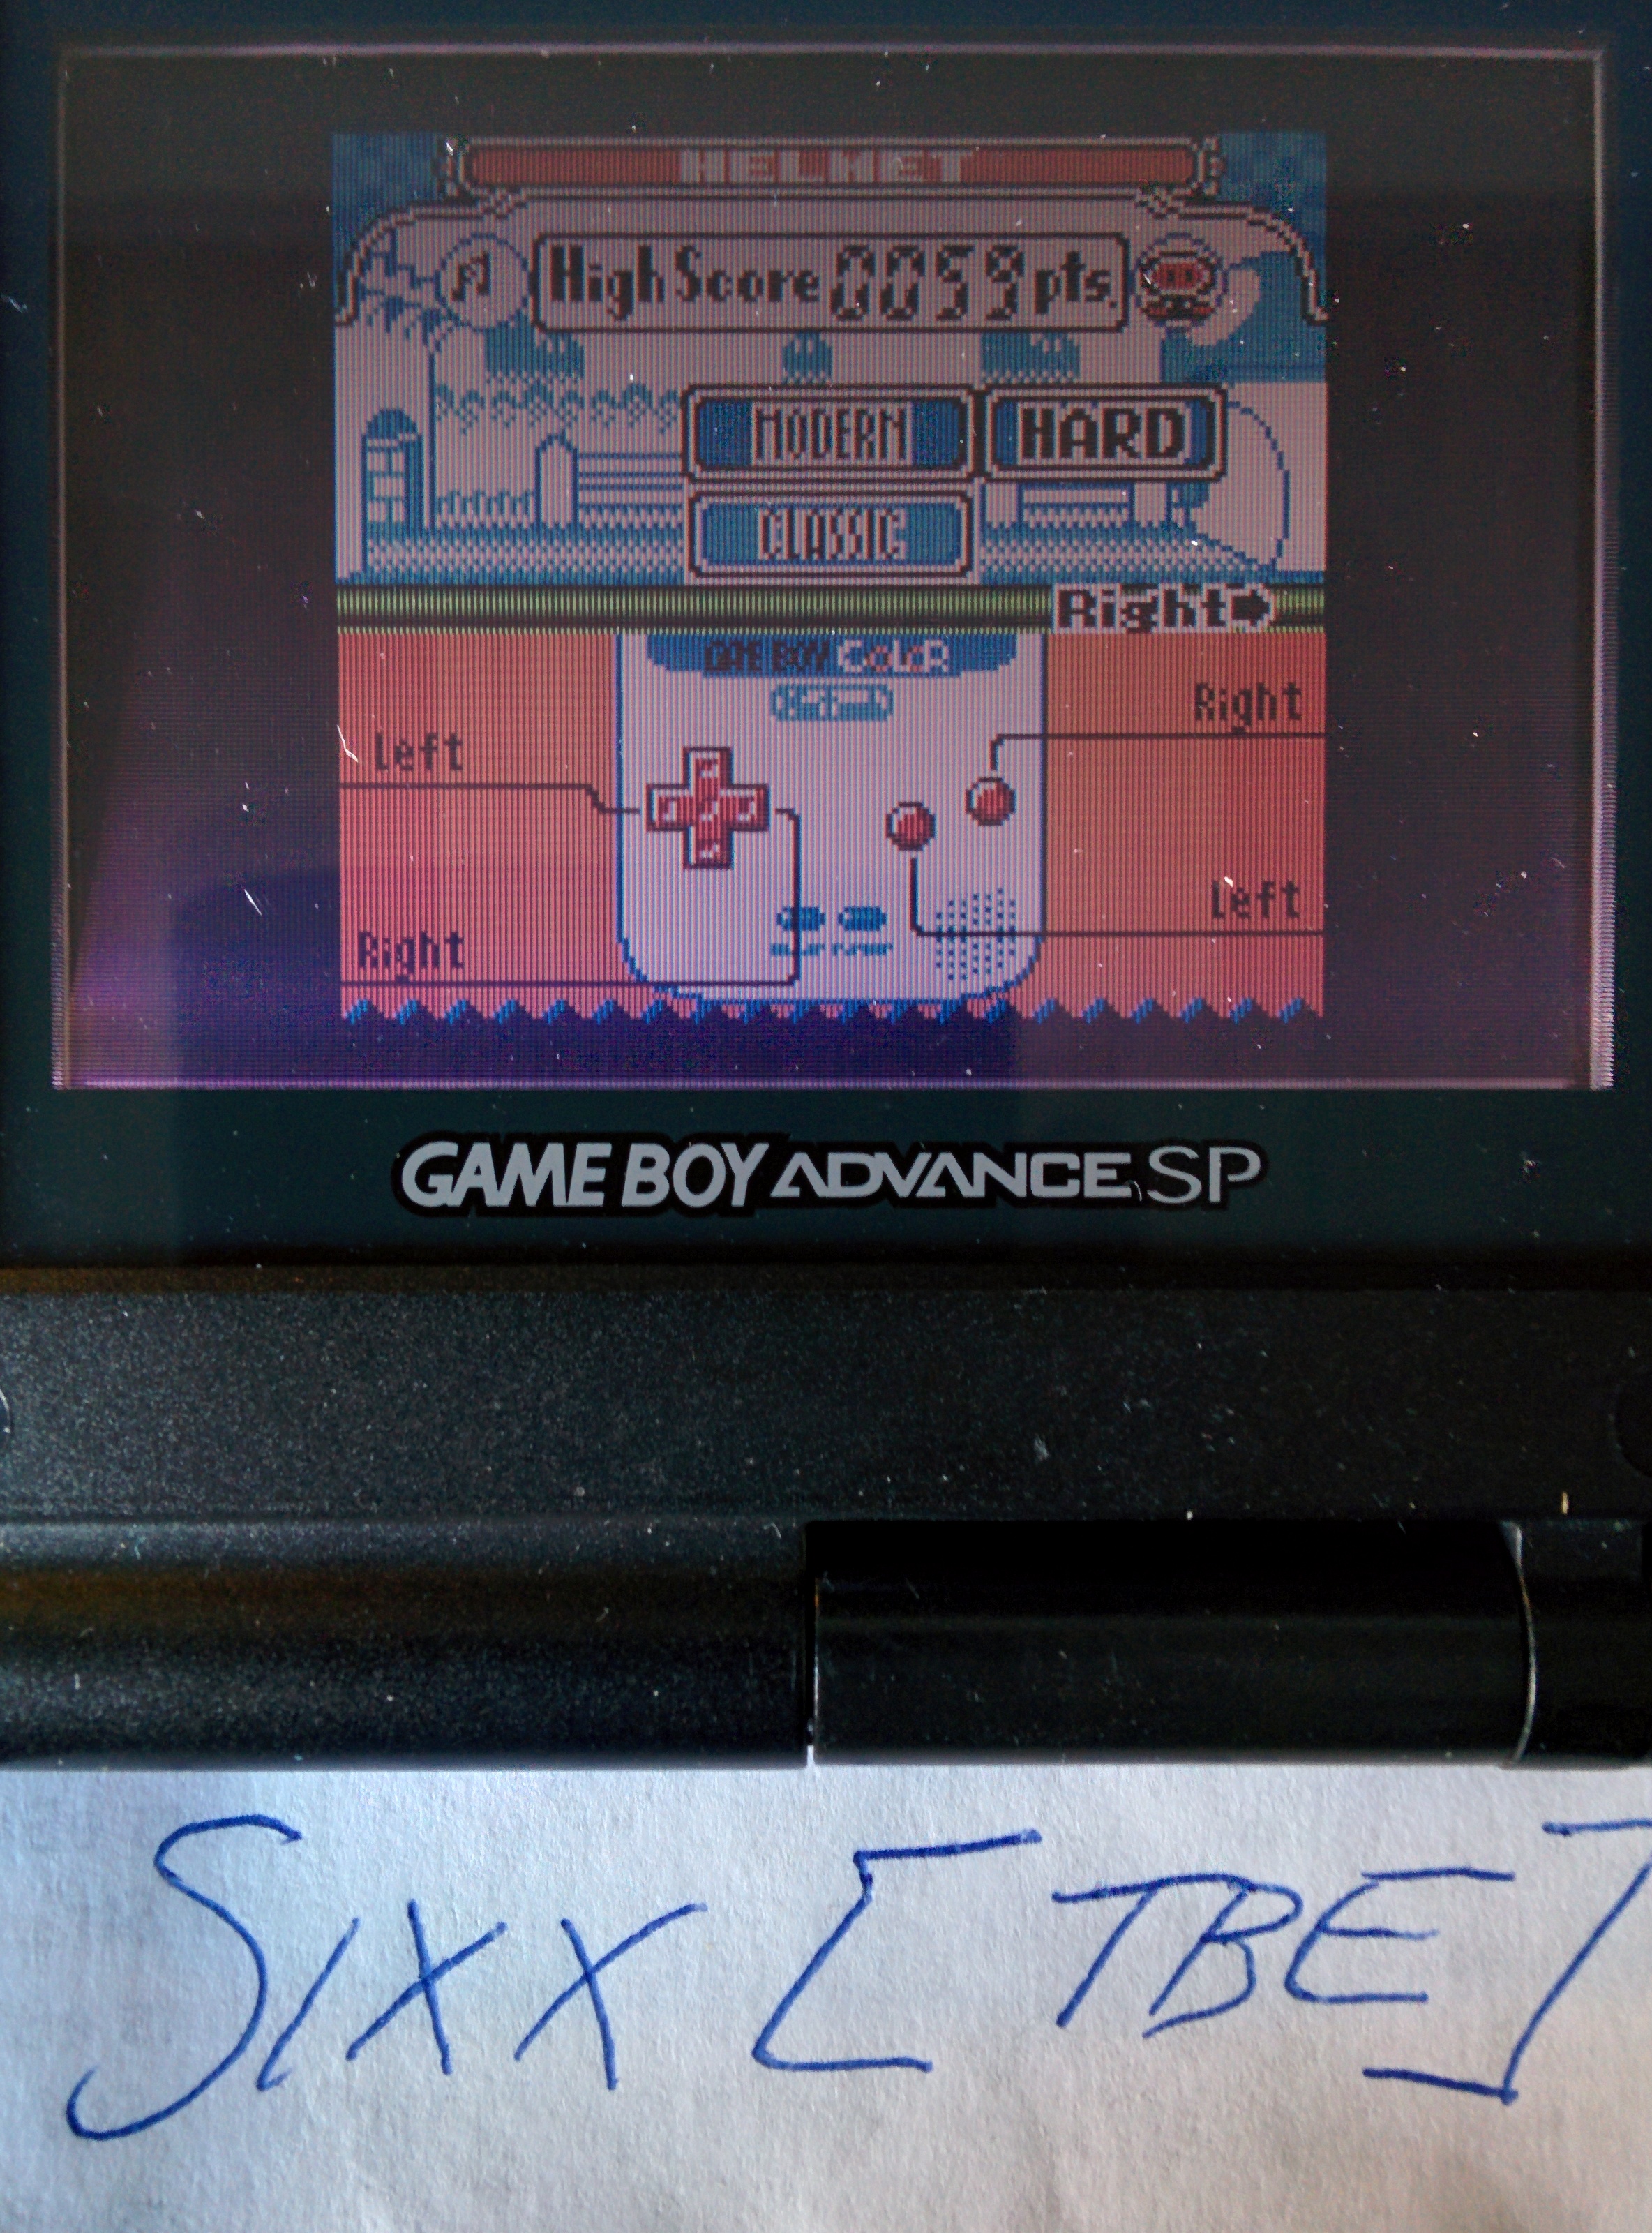 Sixx: Game & Watch Gallery 2: Helmet: Modern: Hard (Game Boy Color) 59 points on 2014-09-01 01:48:34